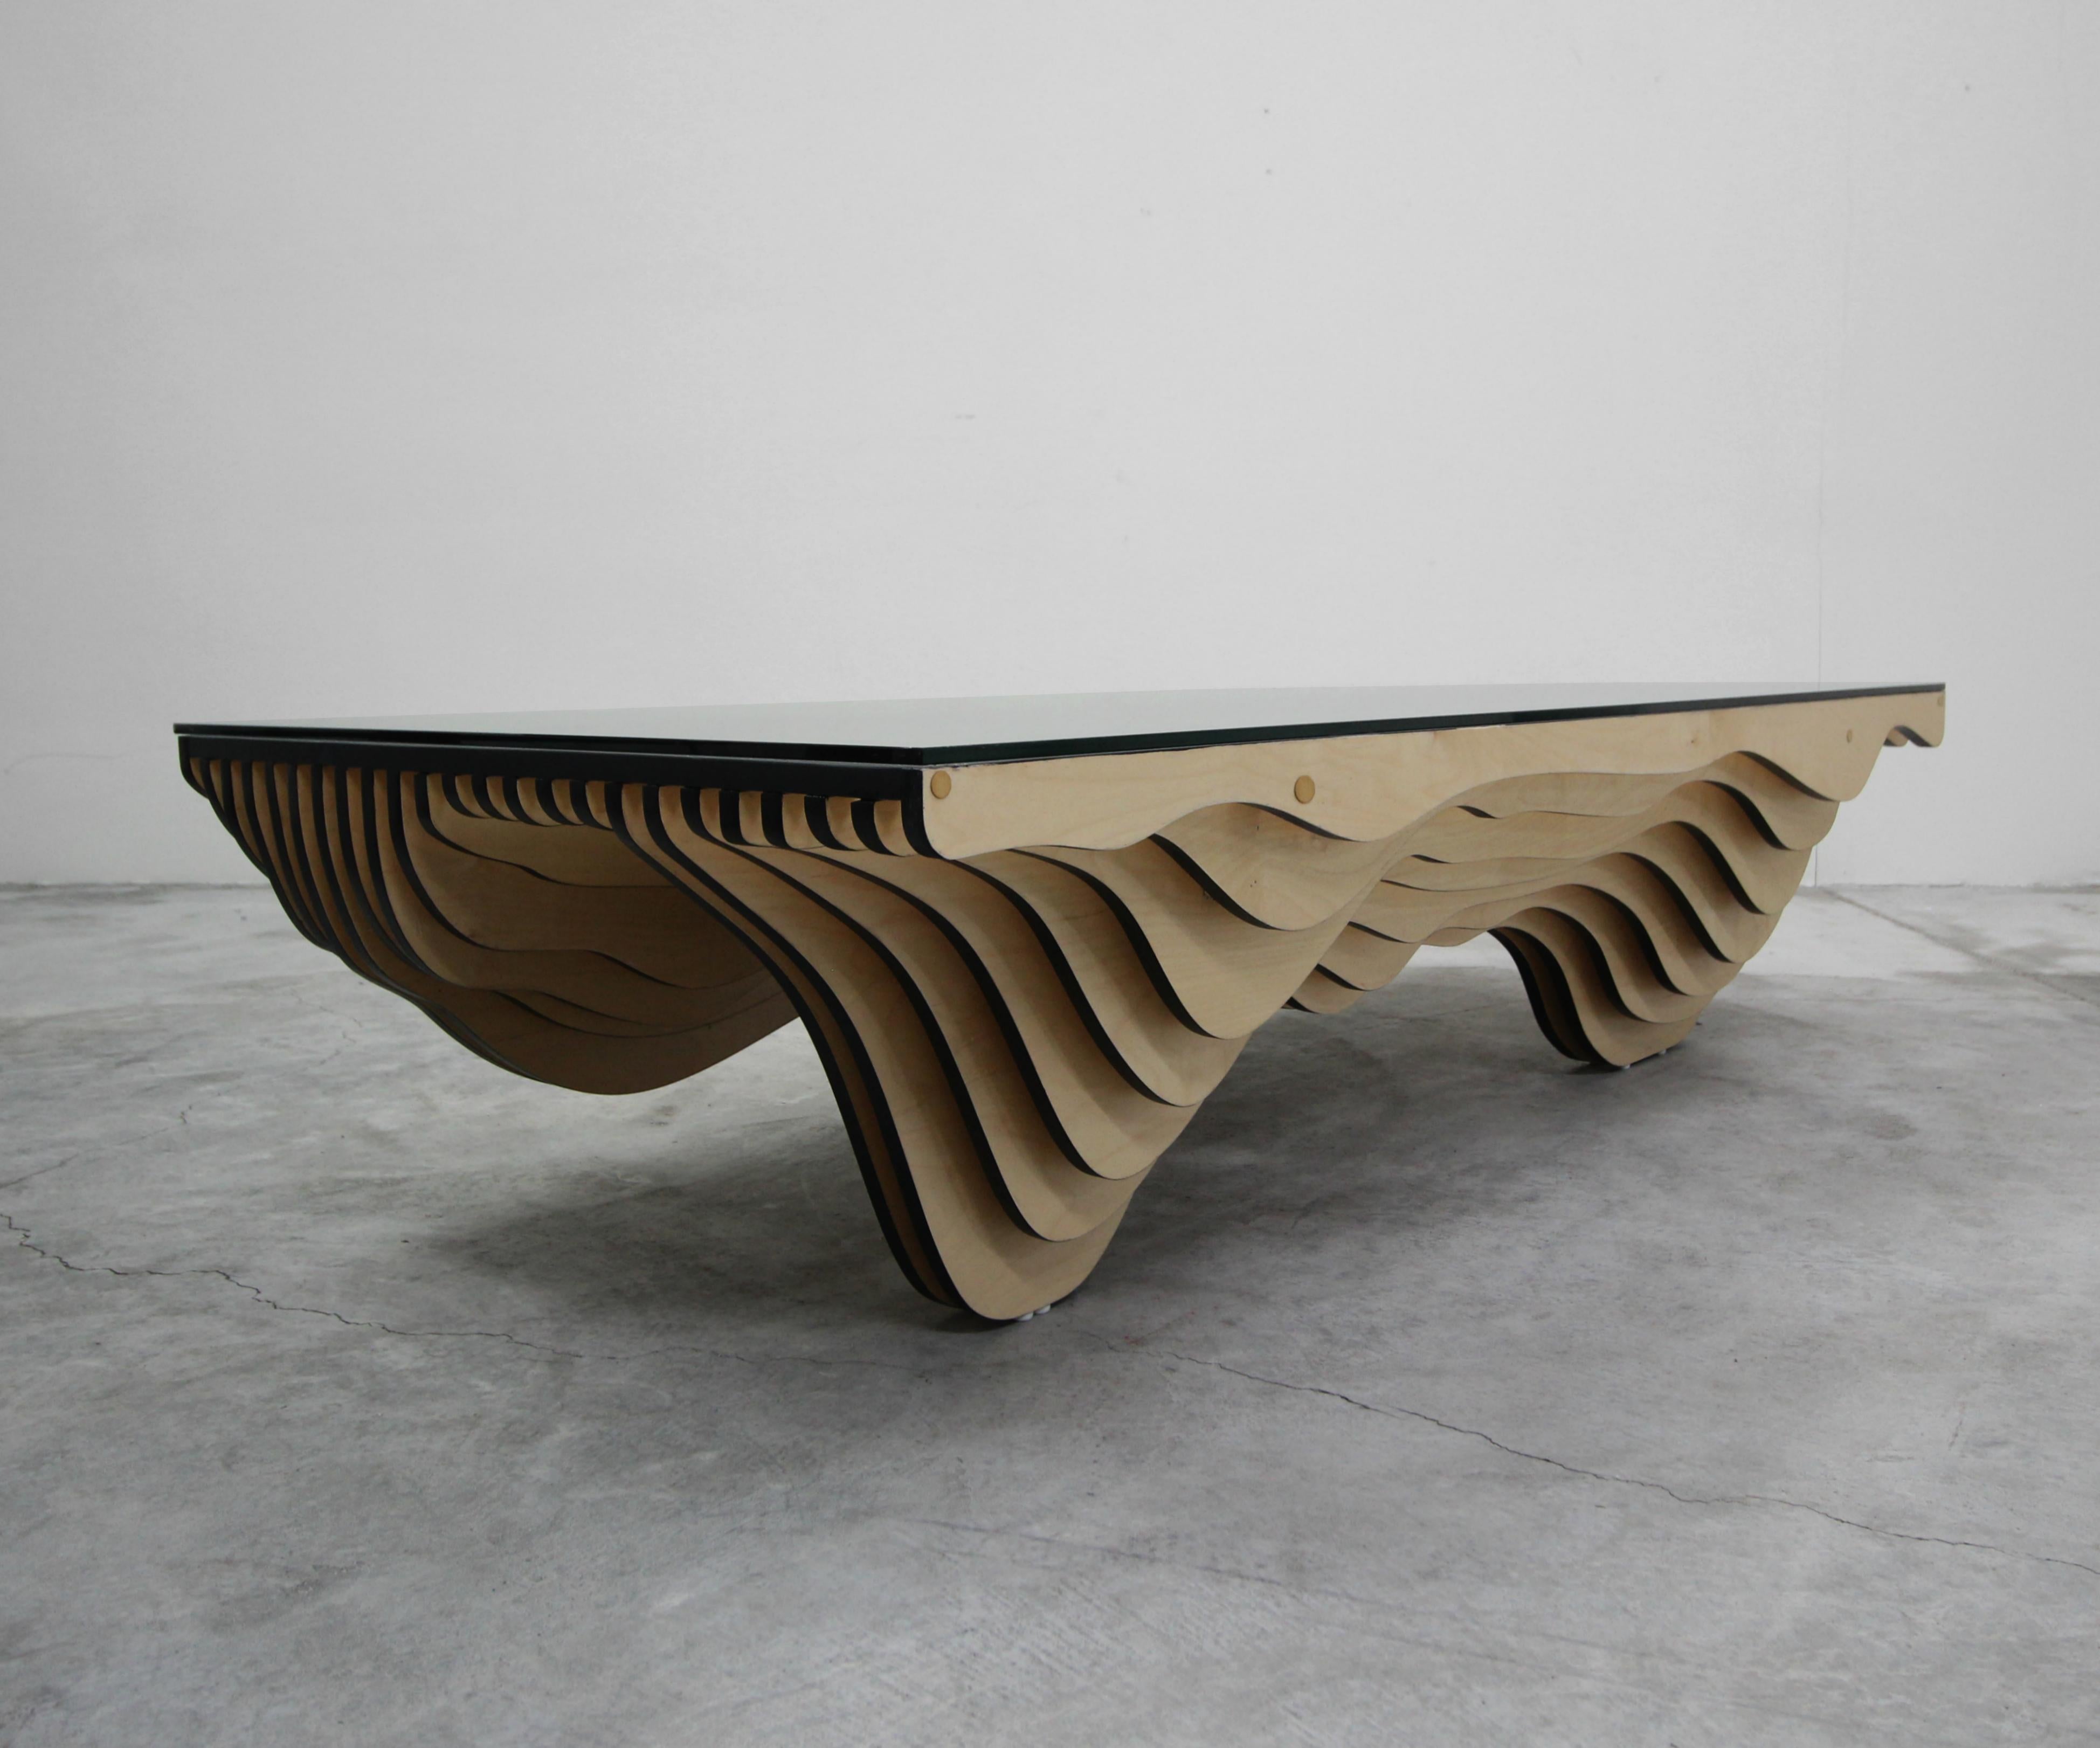 There are no words. This very large coffee table is a one of a kind, design masterpiece. With intriguing vertically stacked wood details making it a real unique, eclectic piece. The table has an appearance of waves or dunes. It is very heavy, and